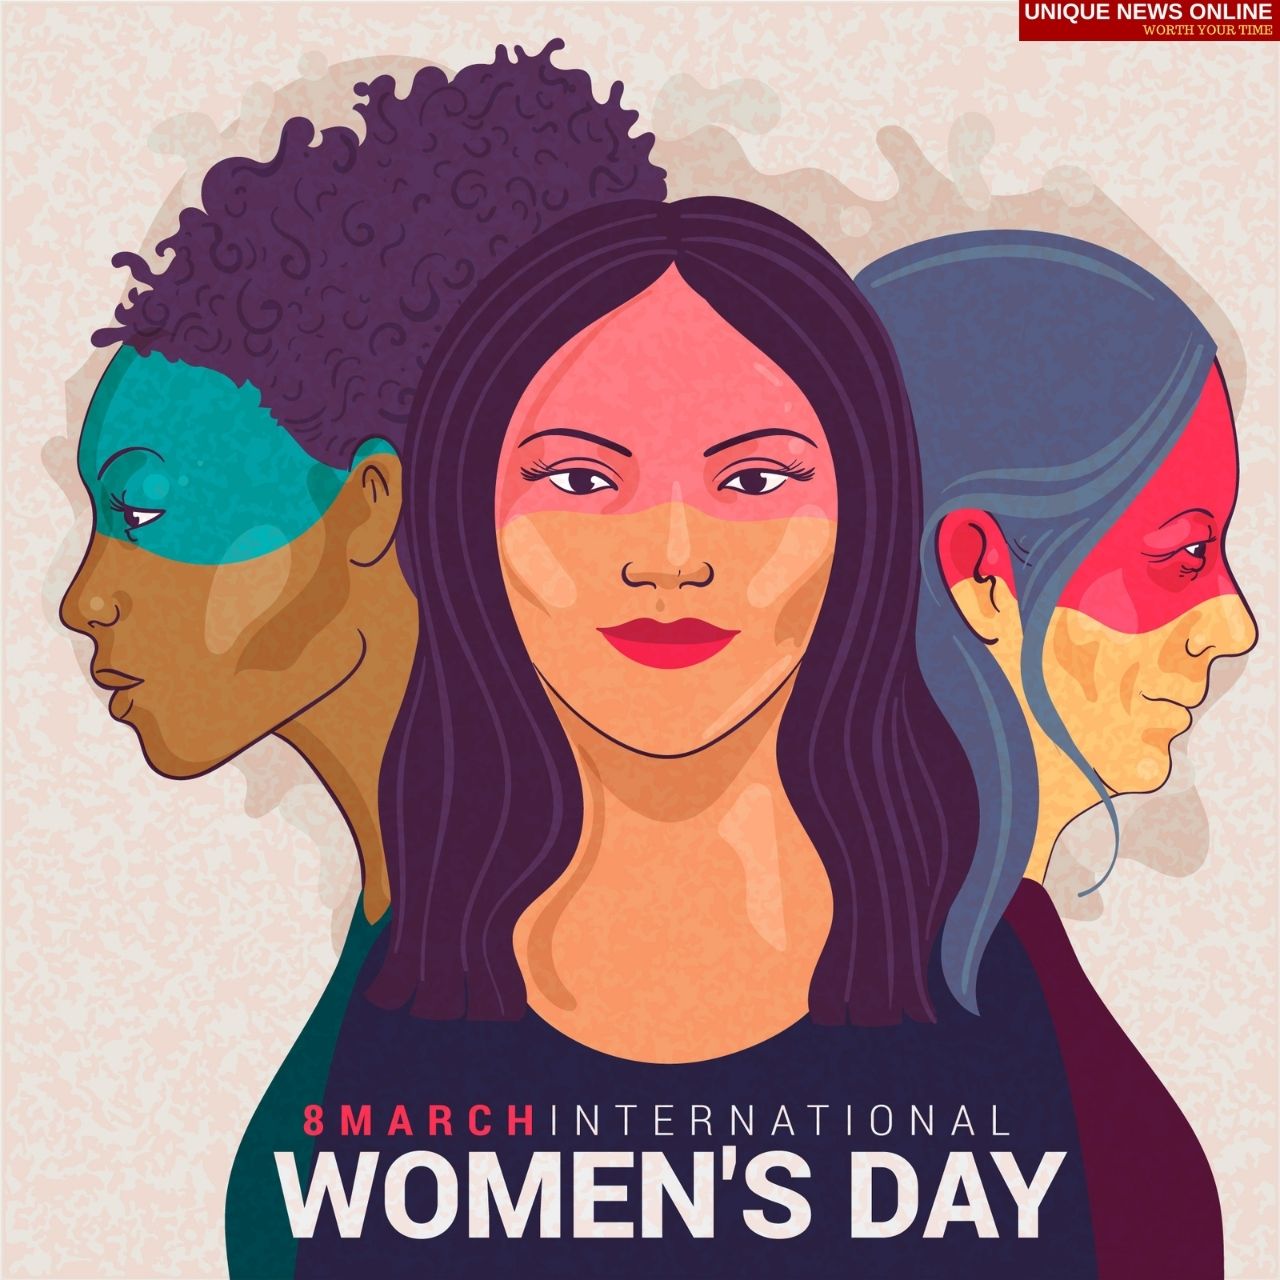 International Women's Day 2022 Slogans, Posters, HD Images, Wallpaper, WhatsApp DP, Banners to Share